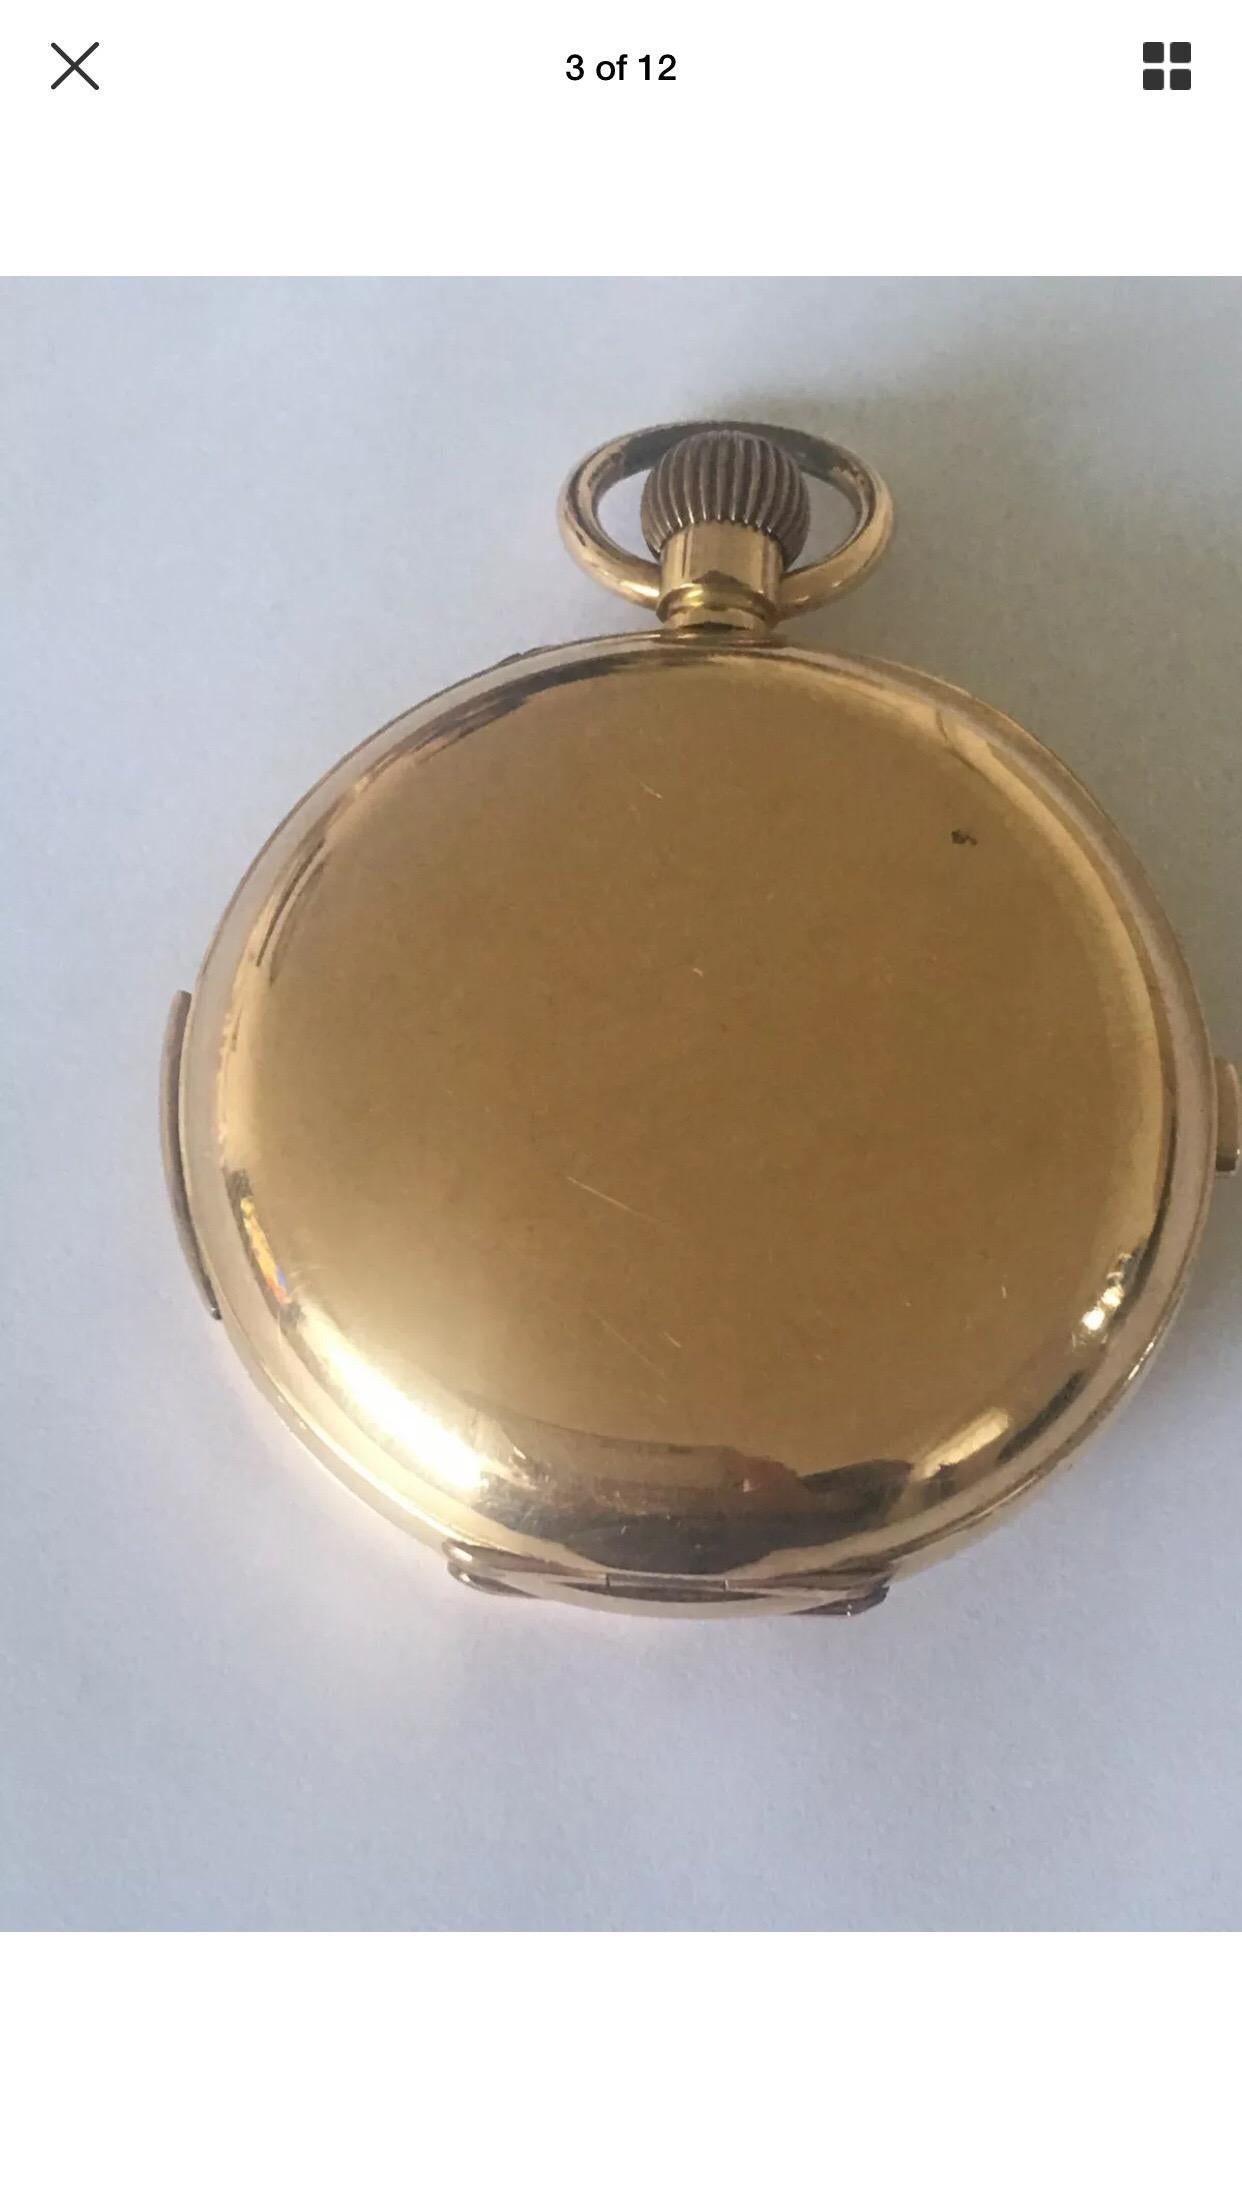 This stunning quarter repeater and chronograph pocket watch is in good working condition and it is ticking well. The metal ring or Loop is a bit tarnished.